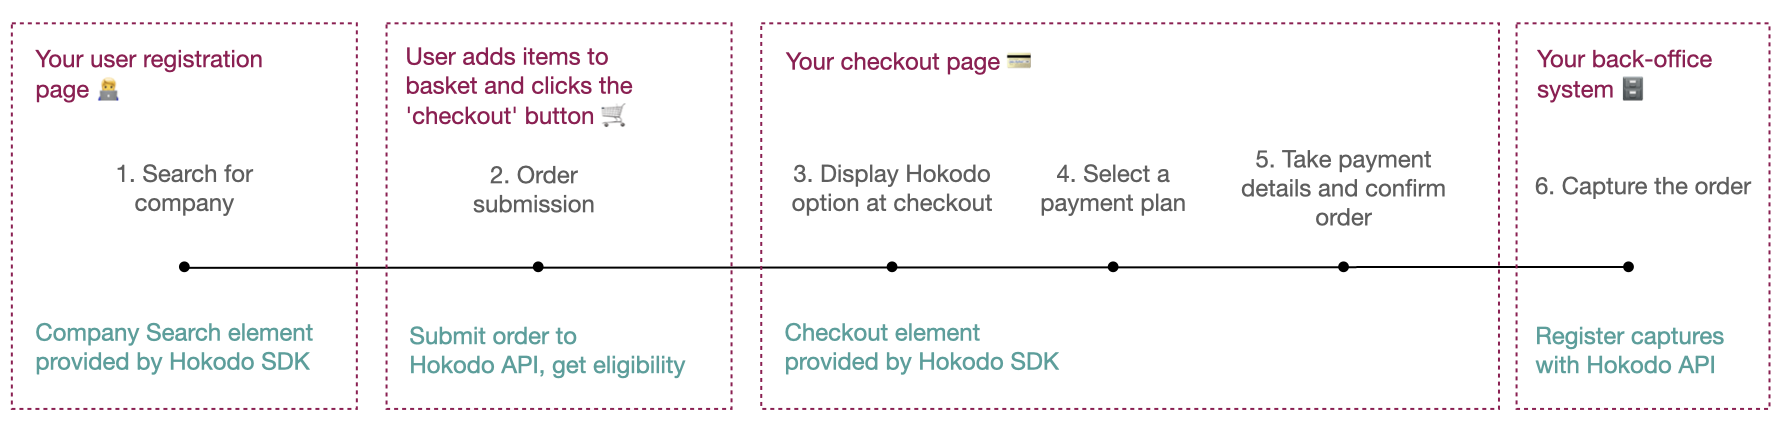 A timeline of the checkout journey showing each step as per the headings below.